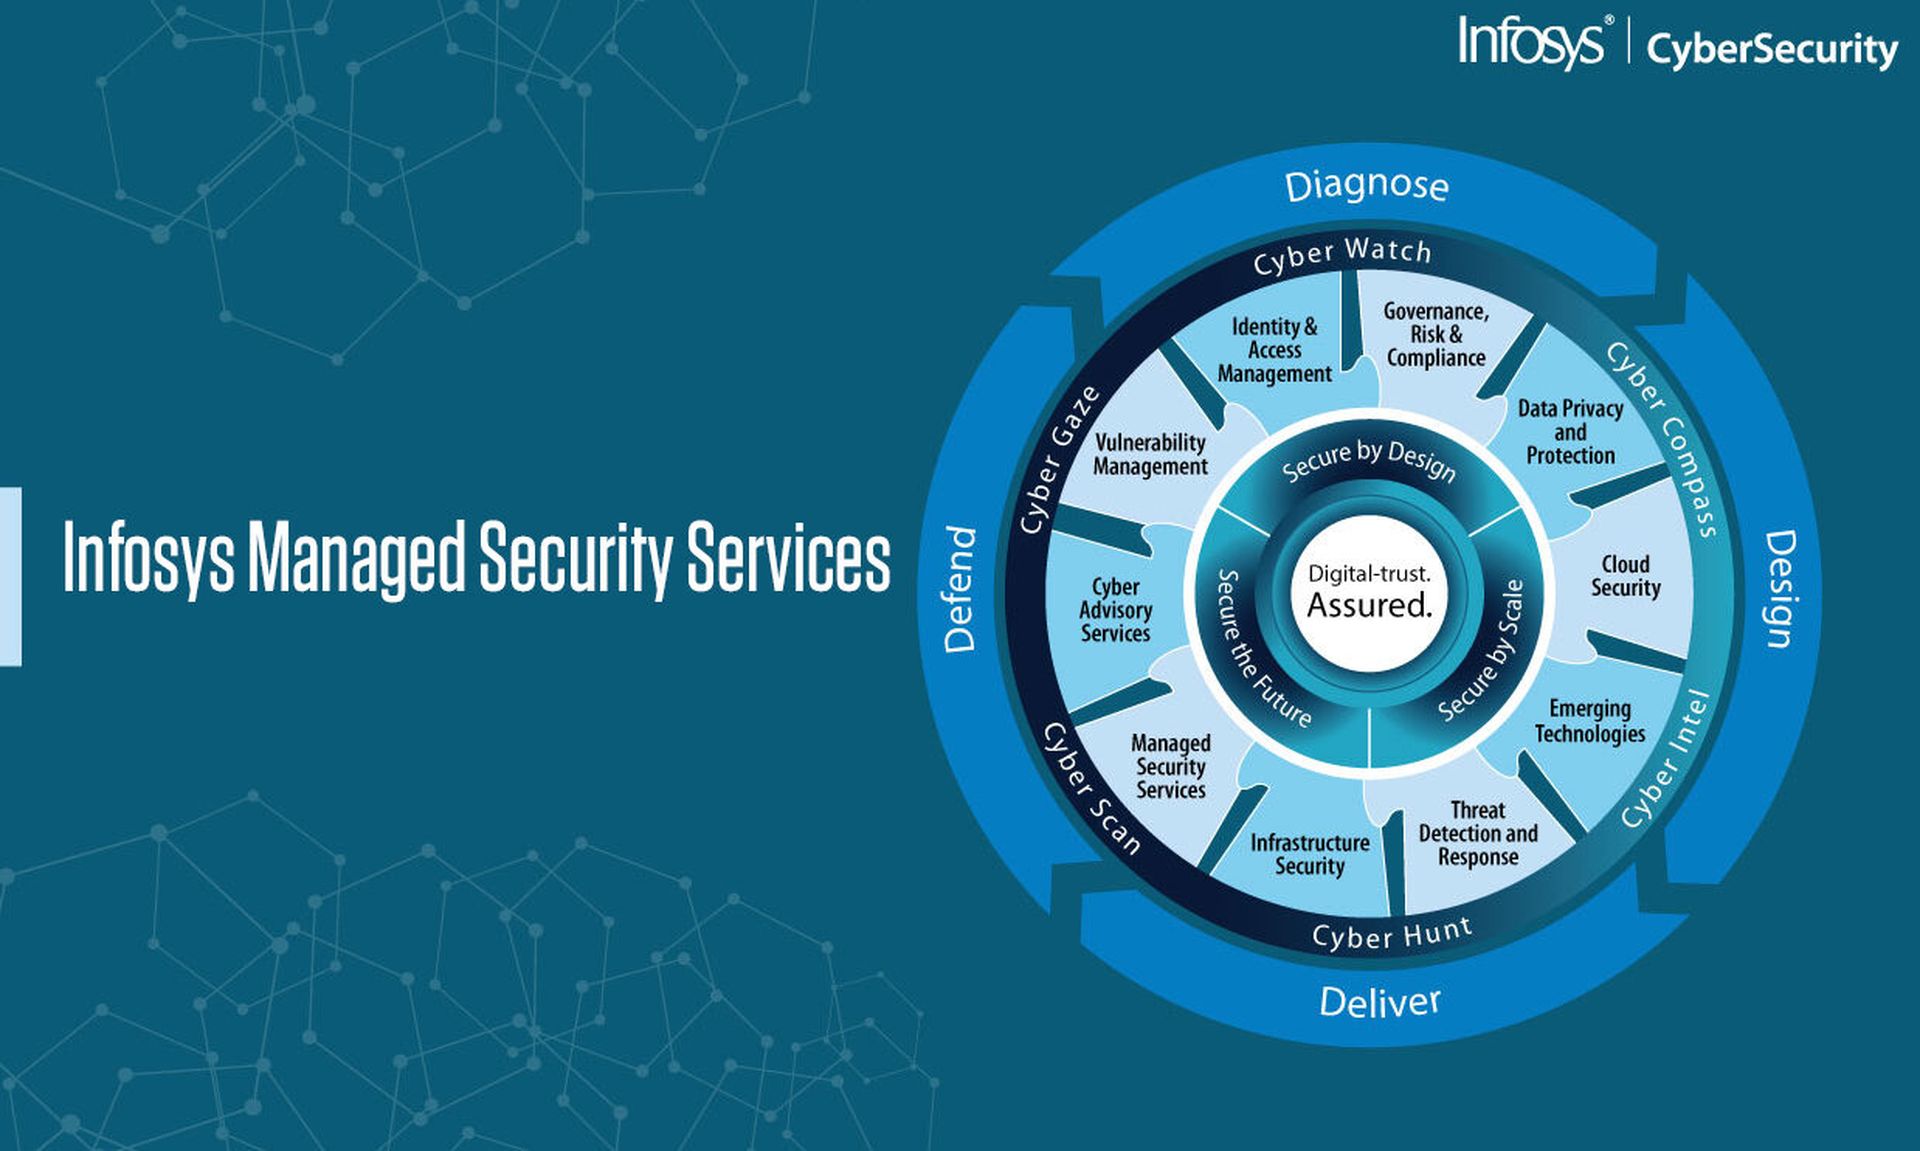 Infosys Managed Security Services